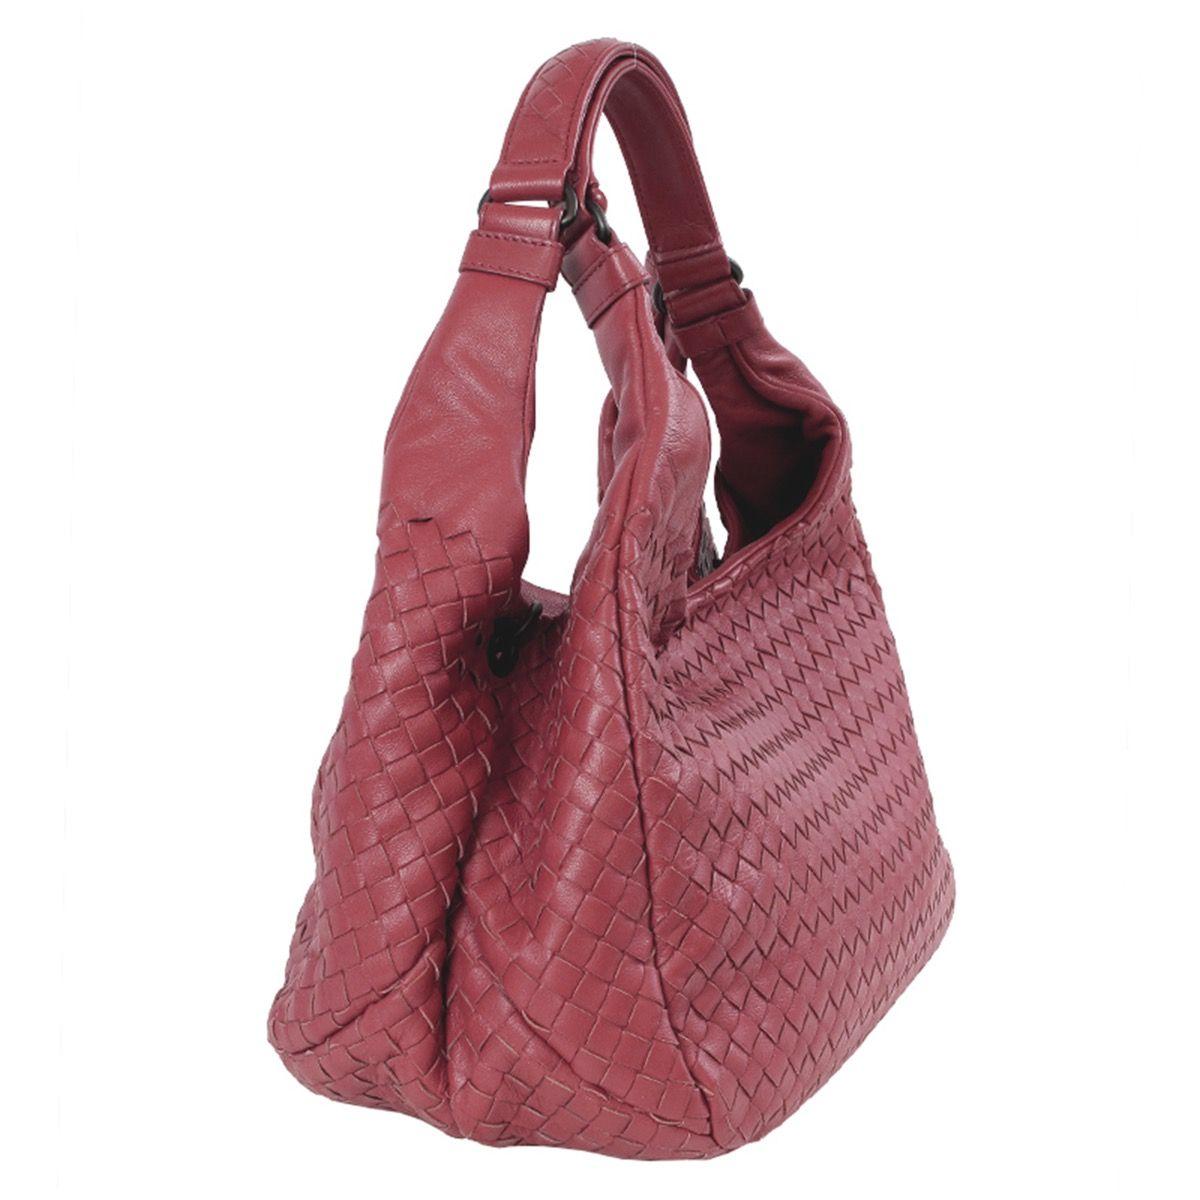 Bottega Veneta 'Medium Campana' shoulder bag in dusty pink leather. Closes with a hidden magnetic on top. Lined in suede with an open pocket against the frotn and a zipper pocket against the back. Has been carried and is in virtually new condition.